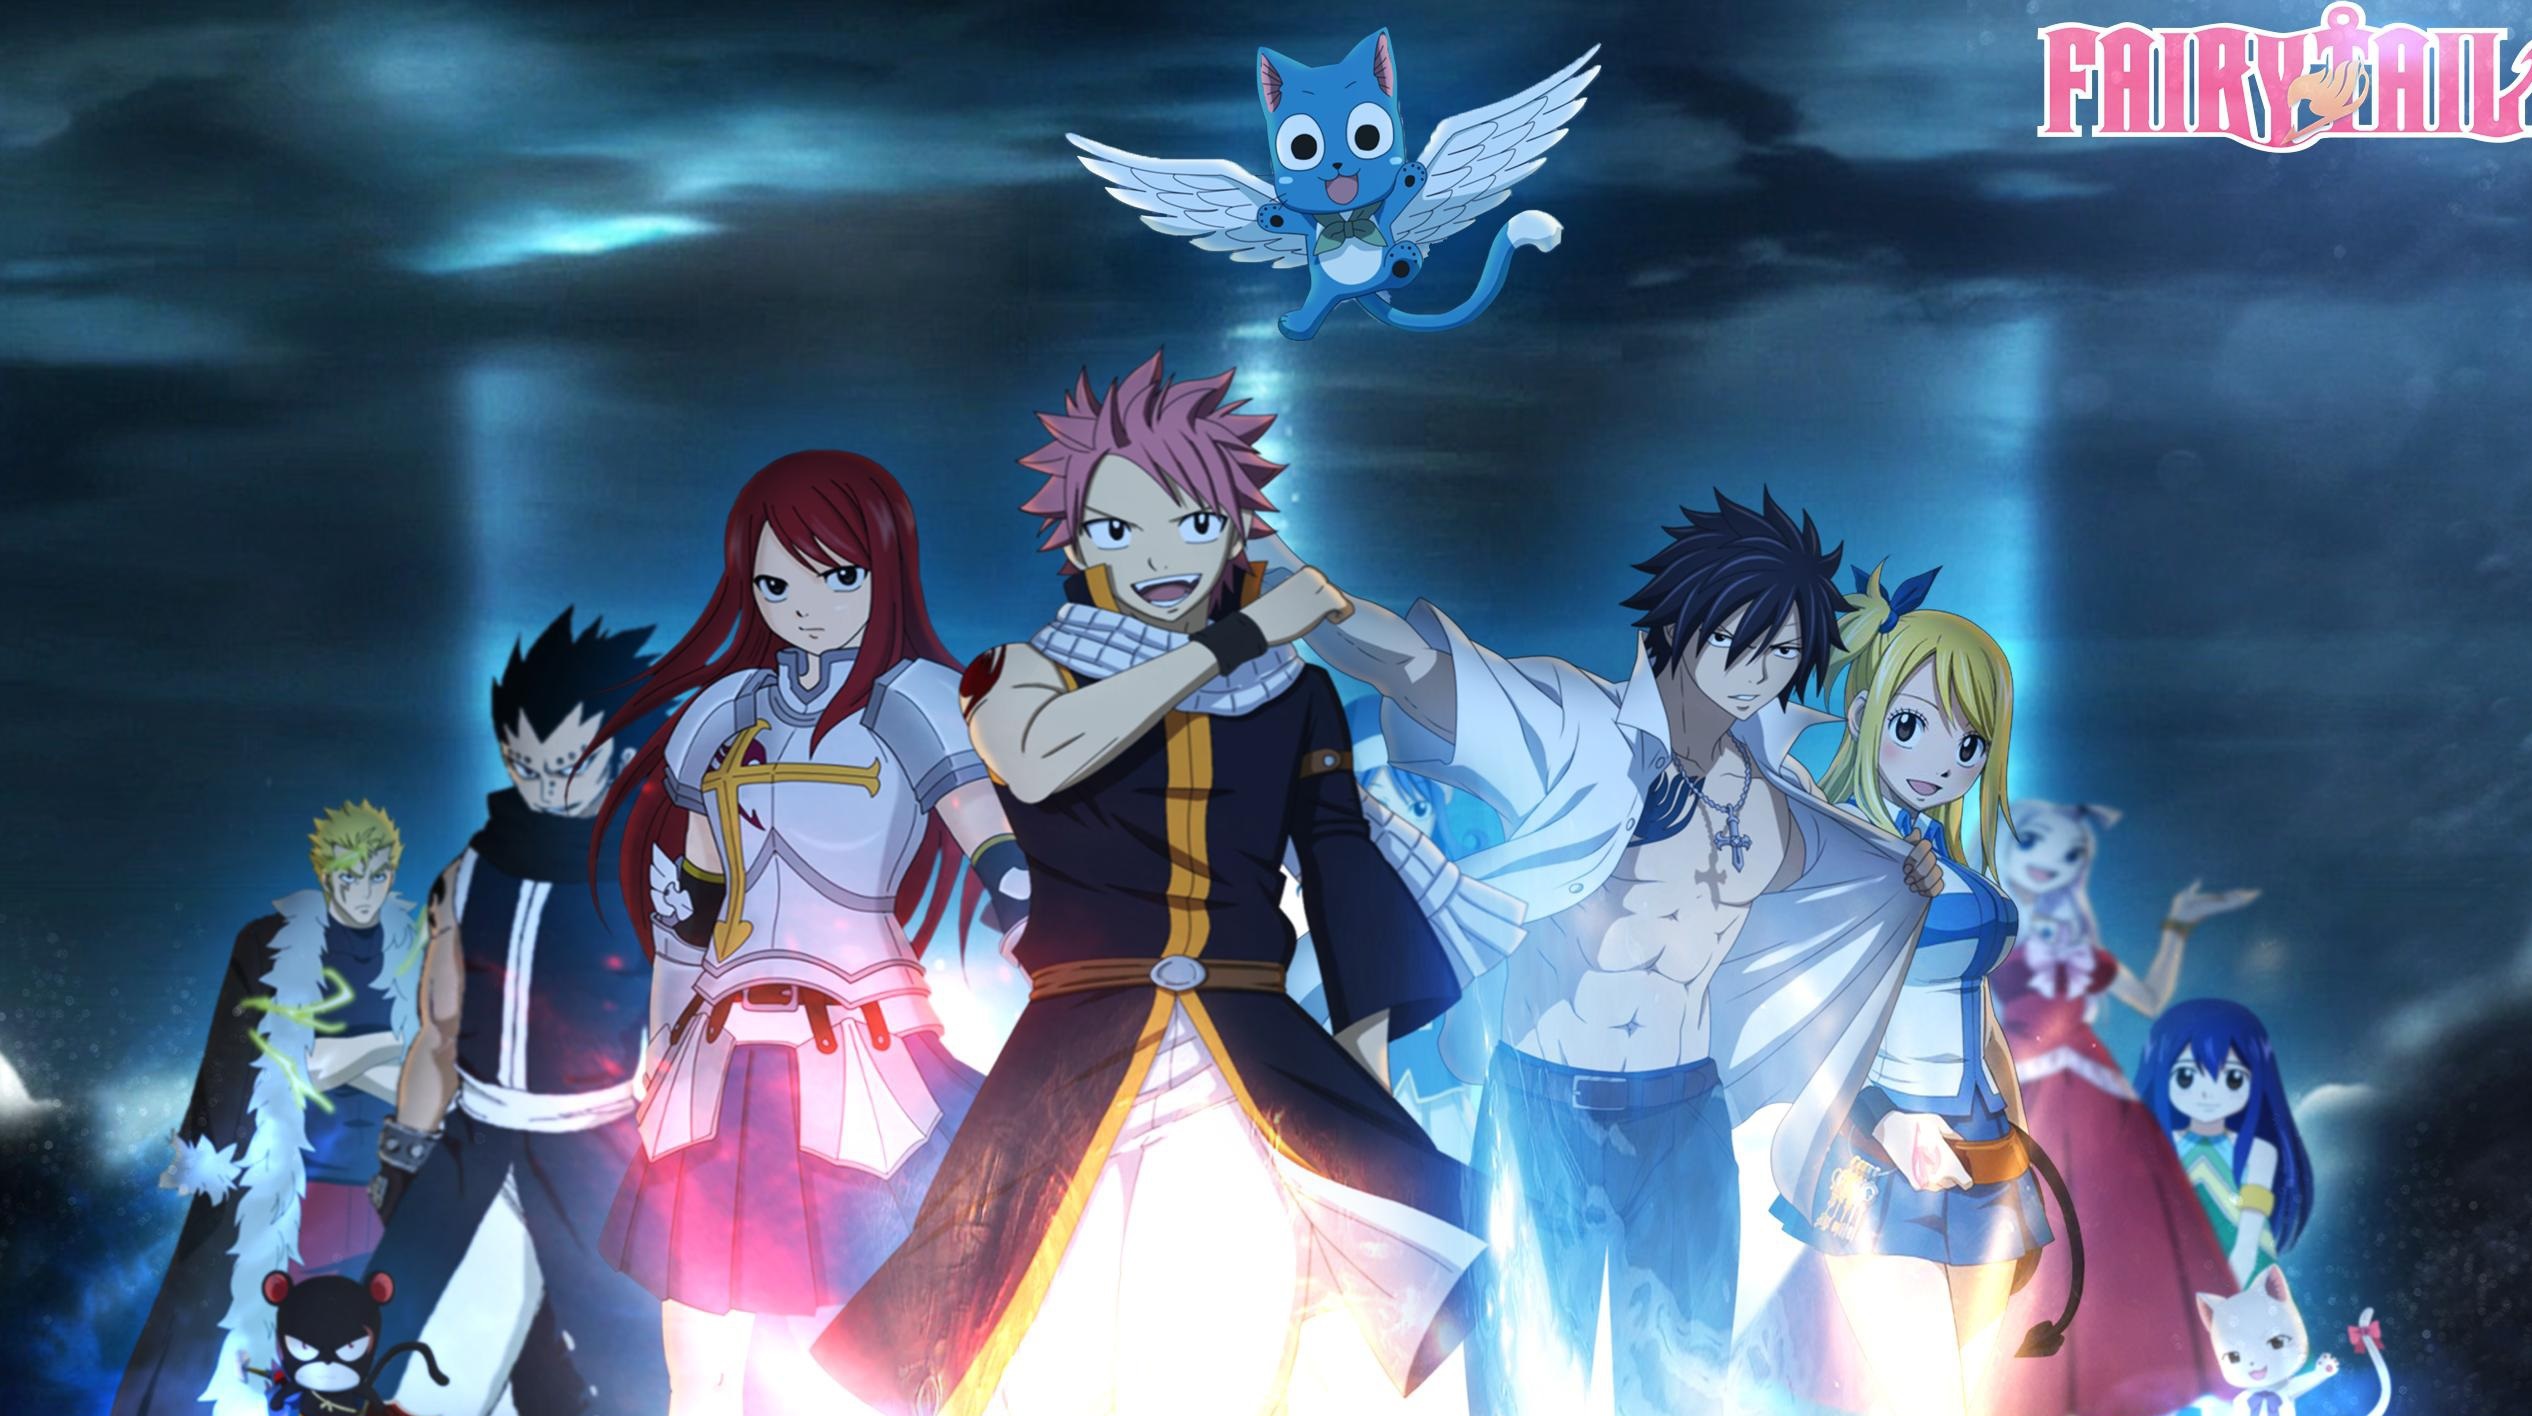 Fairy Tail Wallpaper For Laptop - Fairy Tail Wallpaper Laptop - HD Wallpaper 